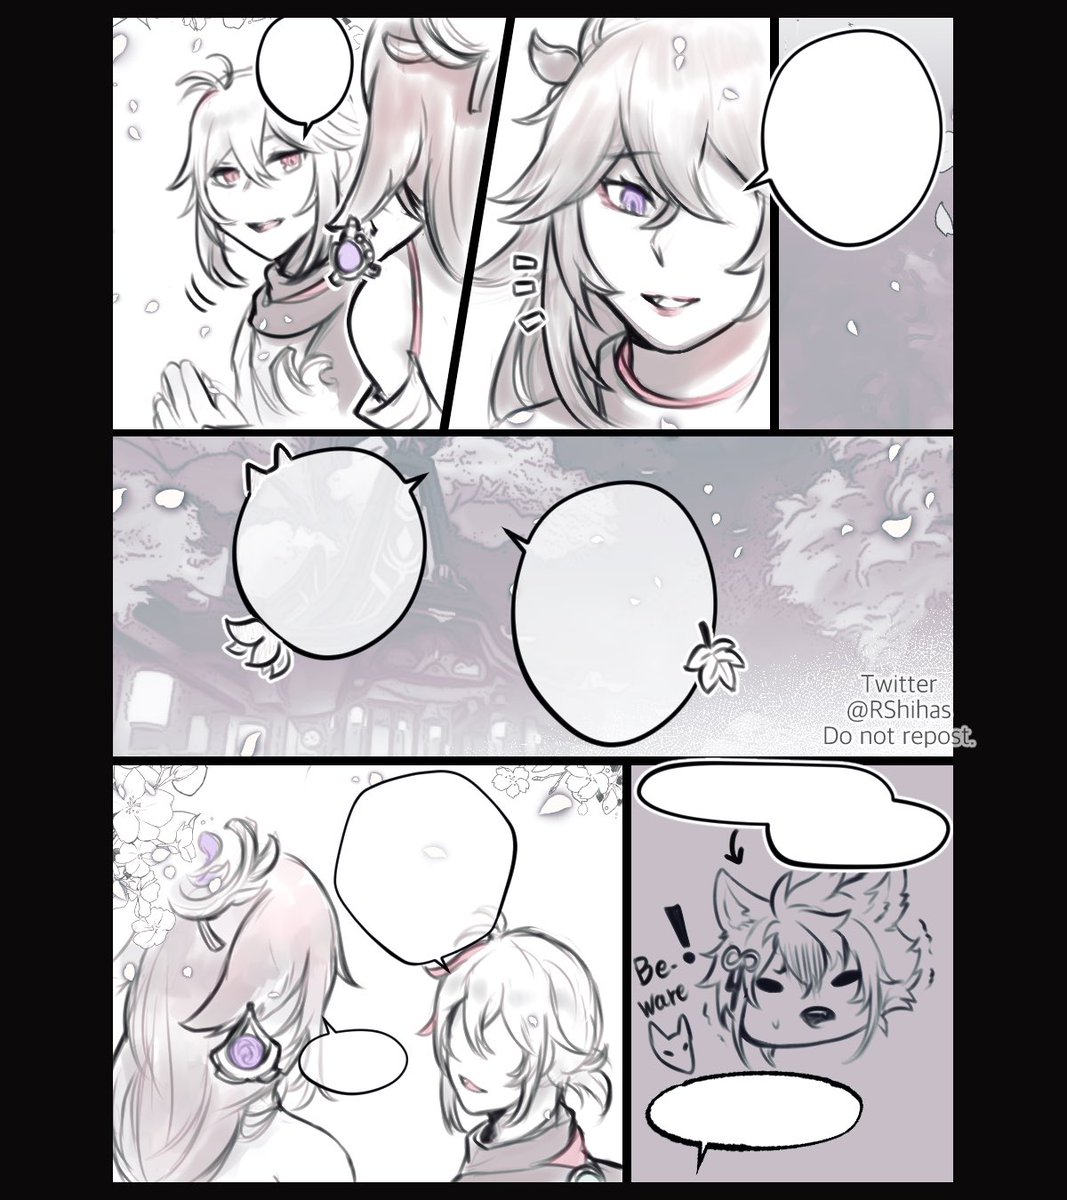 Put too much effort into the first few pages so I dropped the whole thing. It's about Kazuha & Tomo & Yae Miko.